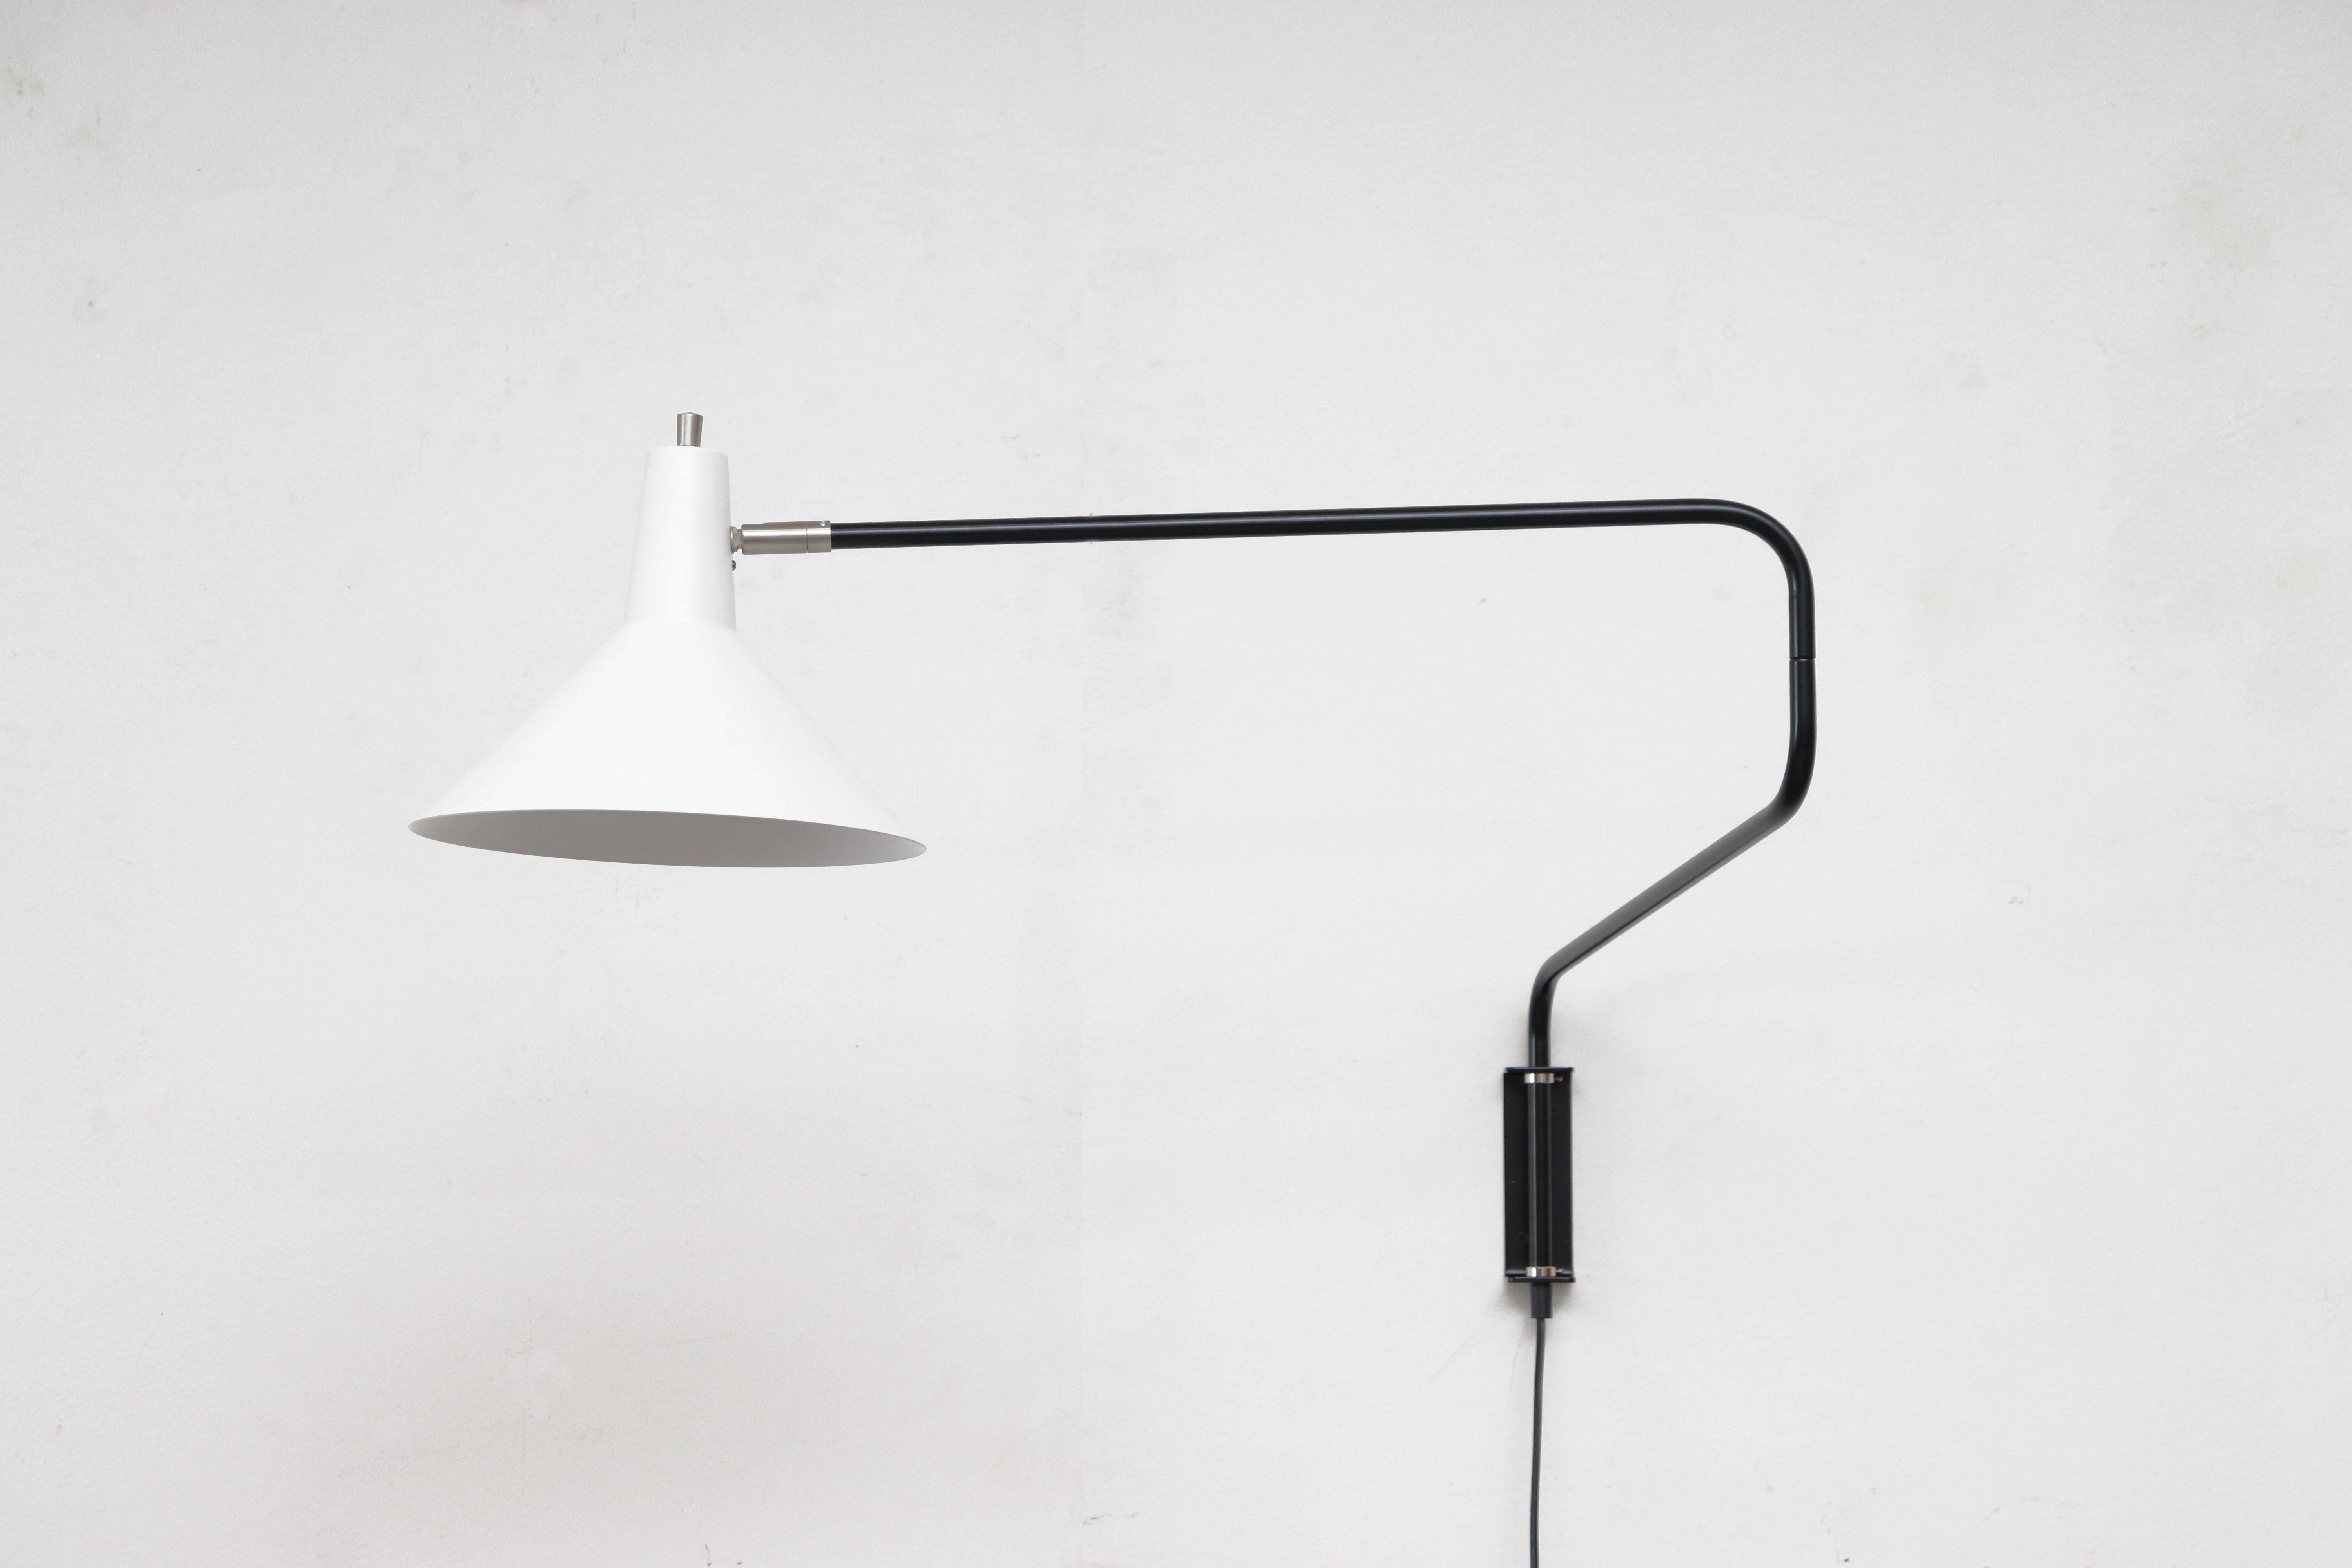 Newly re-issued Anvia 'The Paper Clip' wall lamp in white with black frame. Has paper clip style arm that swings to extend or retract for versatile use and tilting/rotating shade.